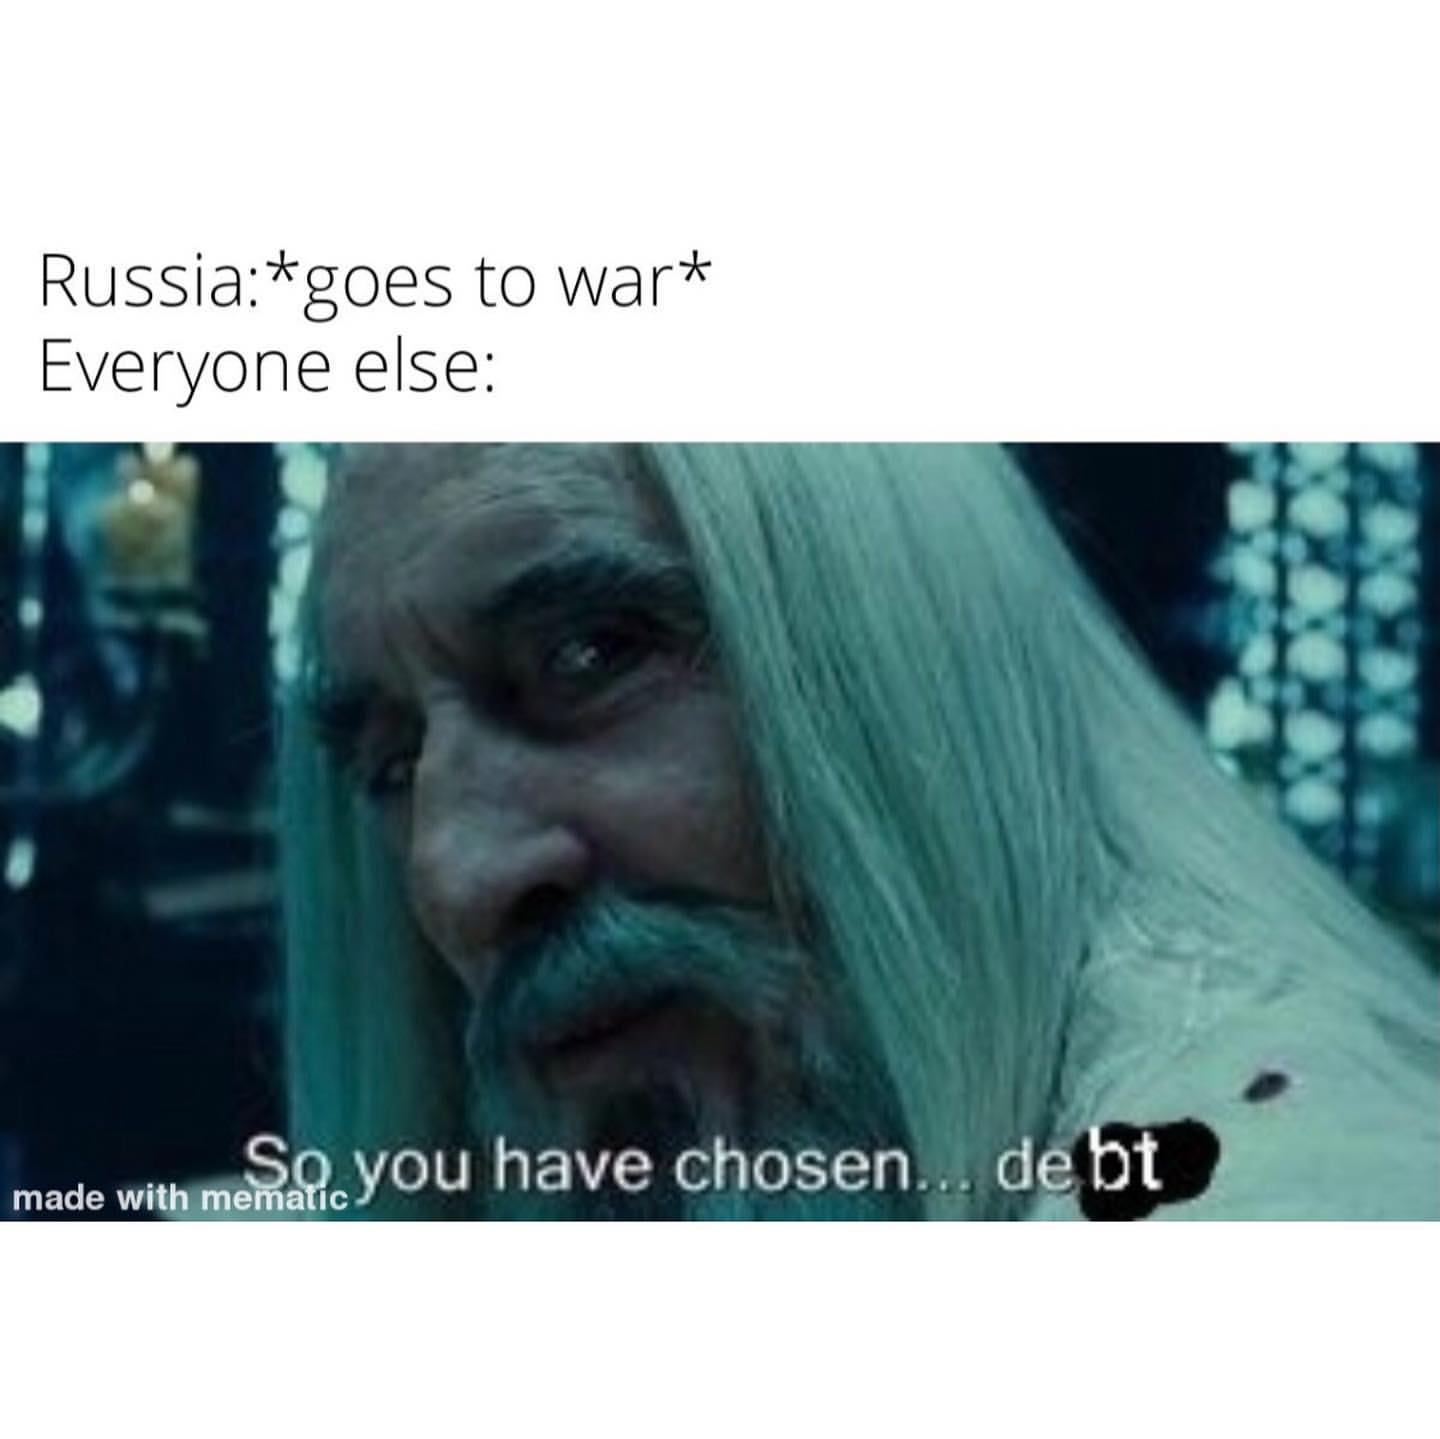 Russia: *goes to war* Everyone else: So you have chosen... debt.